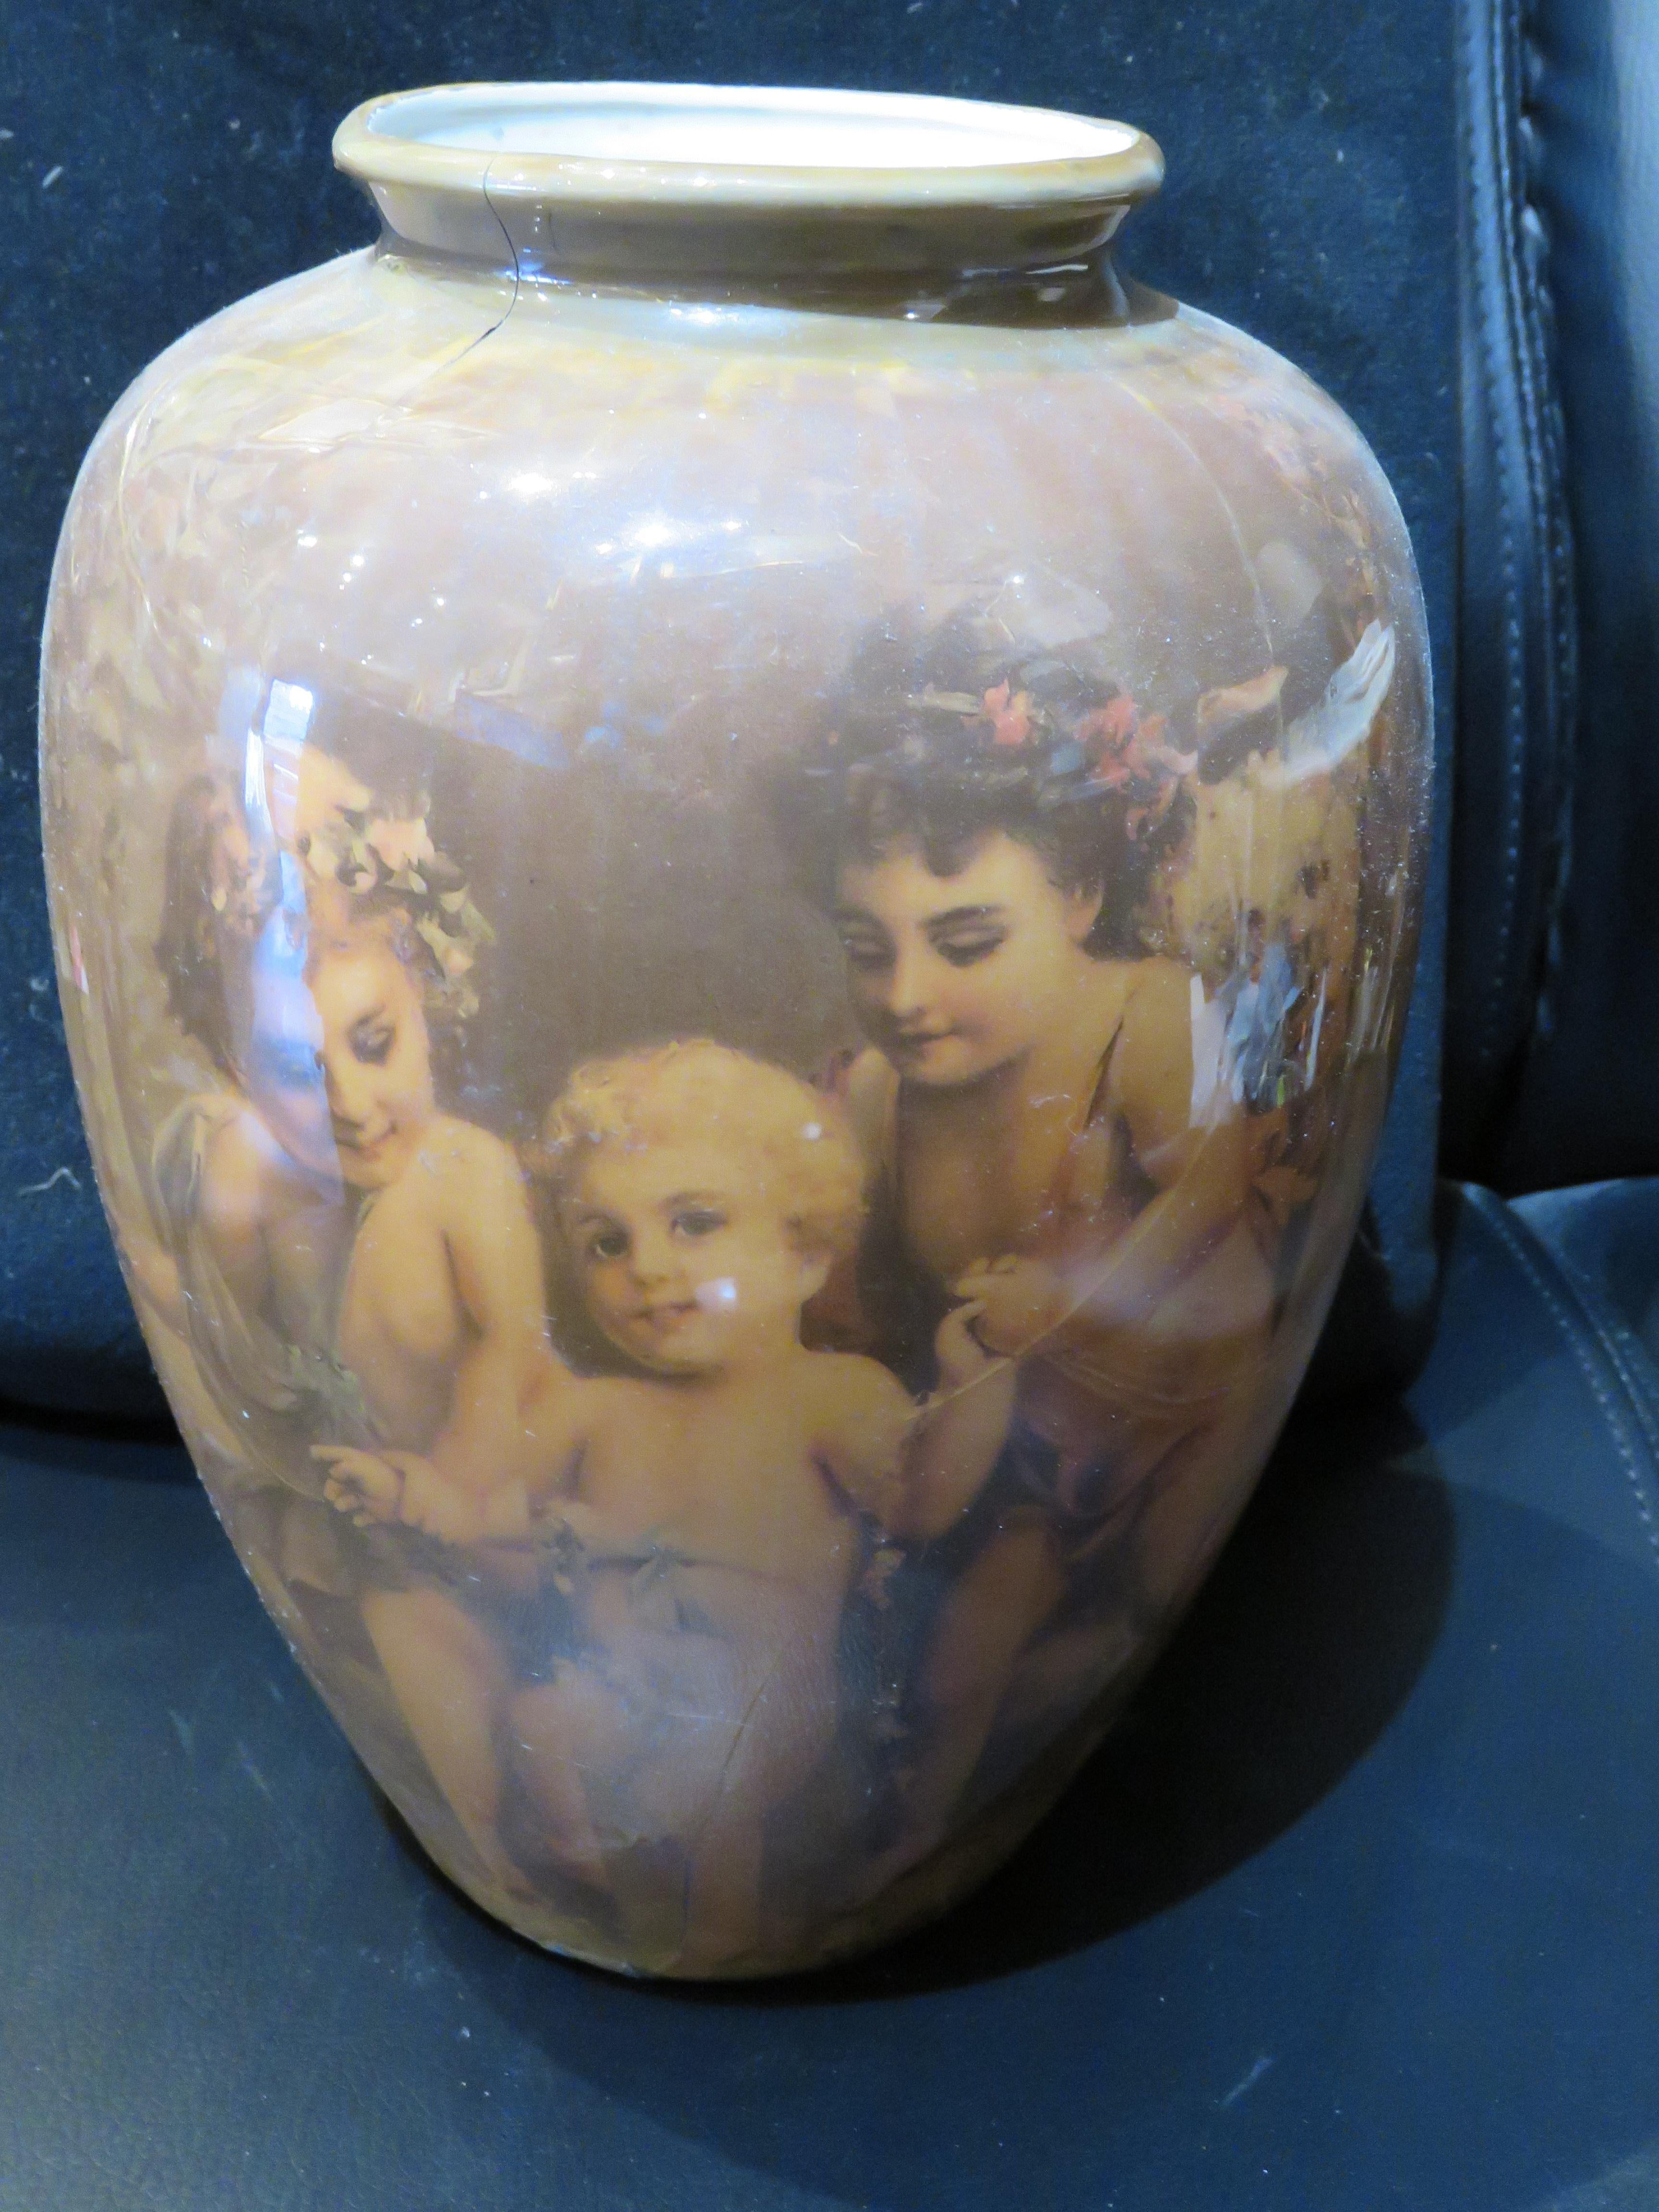 The Following Items we are offering is a Rare Important Estate Antique Vase of Cherub Angelic Children glossy overlay Porcelain Vase Depicting Three Children Standing together Holding Wreath of Garland and another sitting with a Basket of Apples.